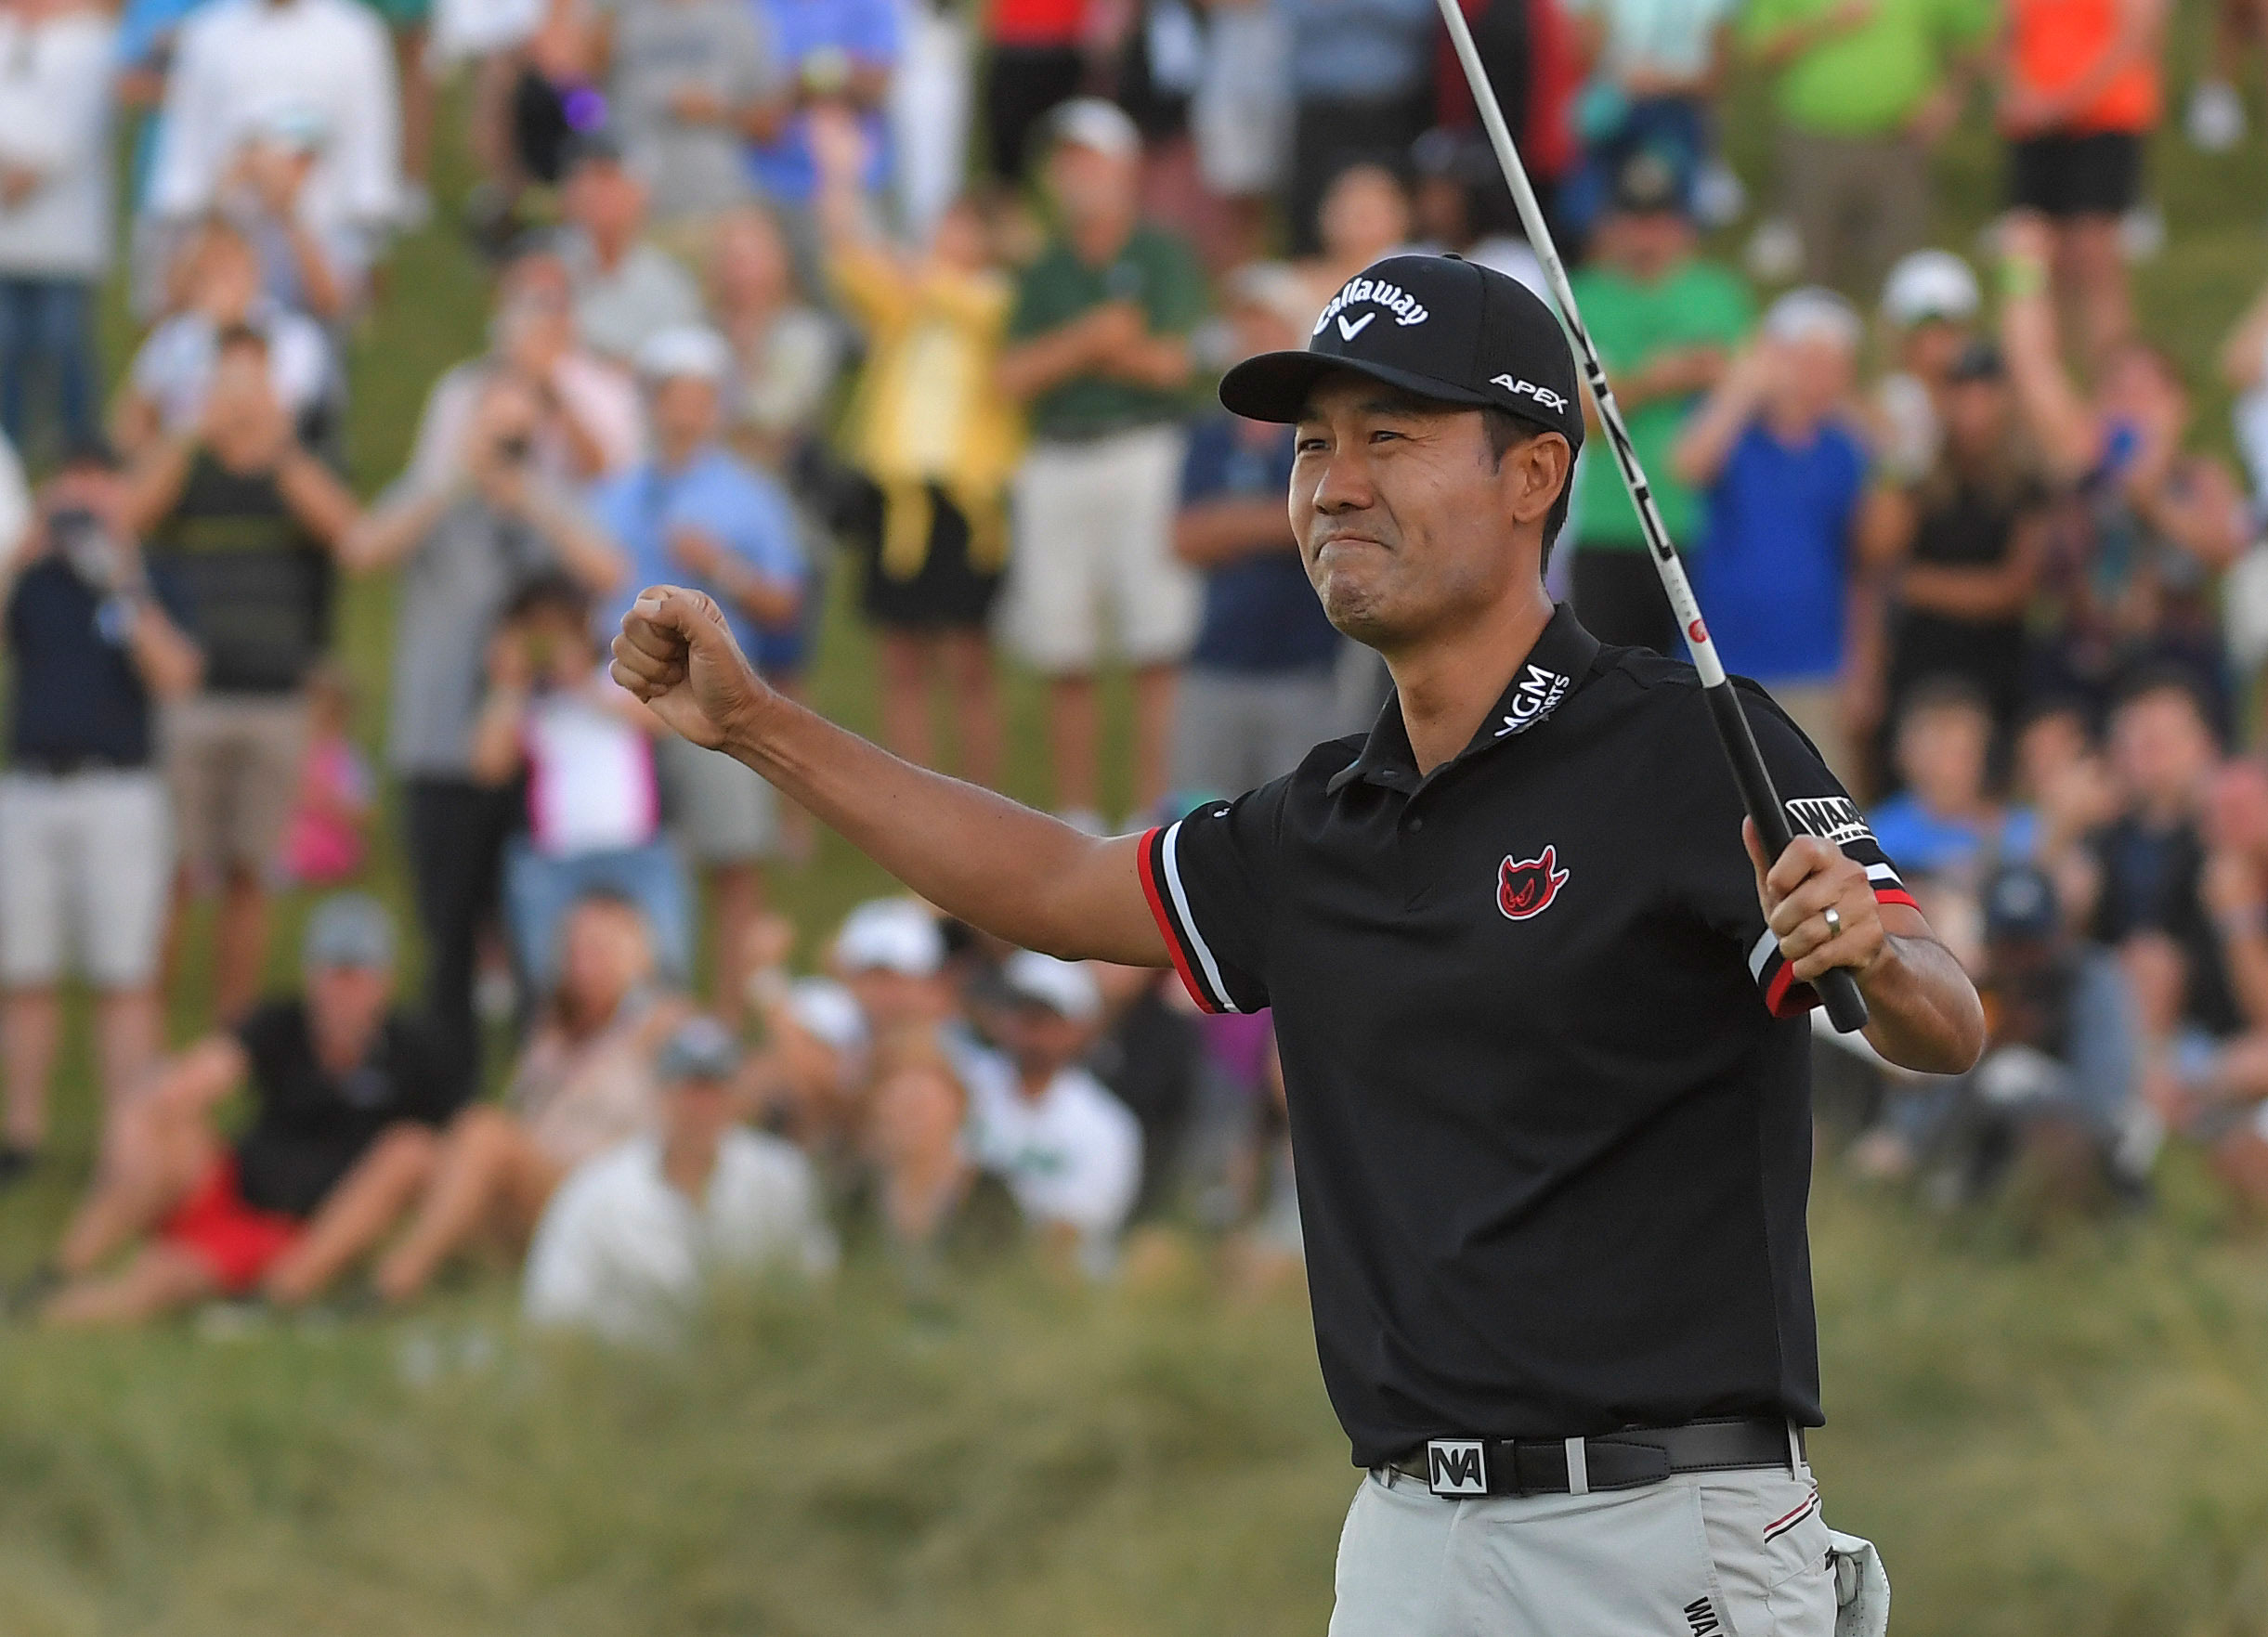 Kevin Na S Thrill Ride Ends With A Playoff Victory Over Patrick Cantlay Golf News And Tour Information Golf Digest